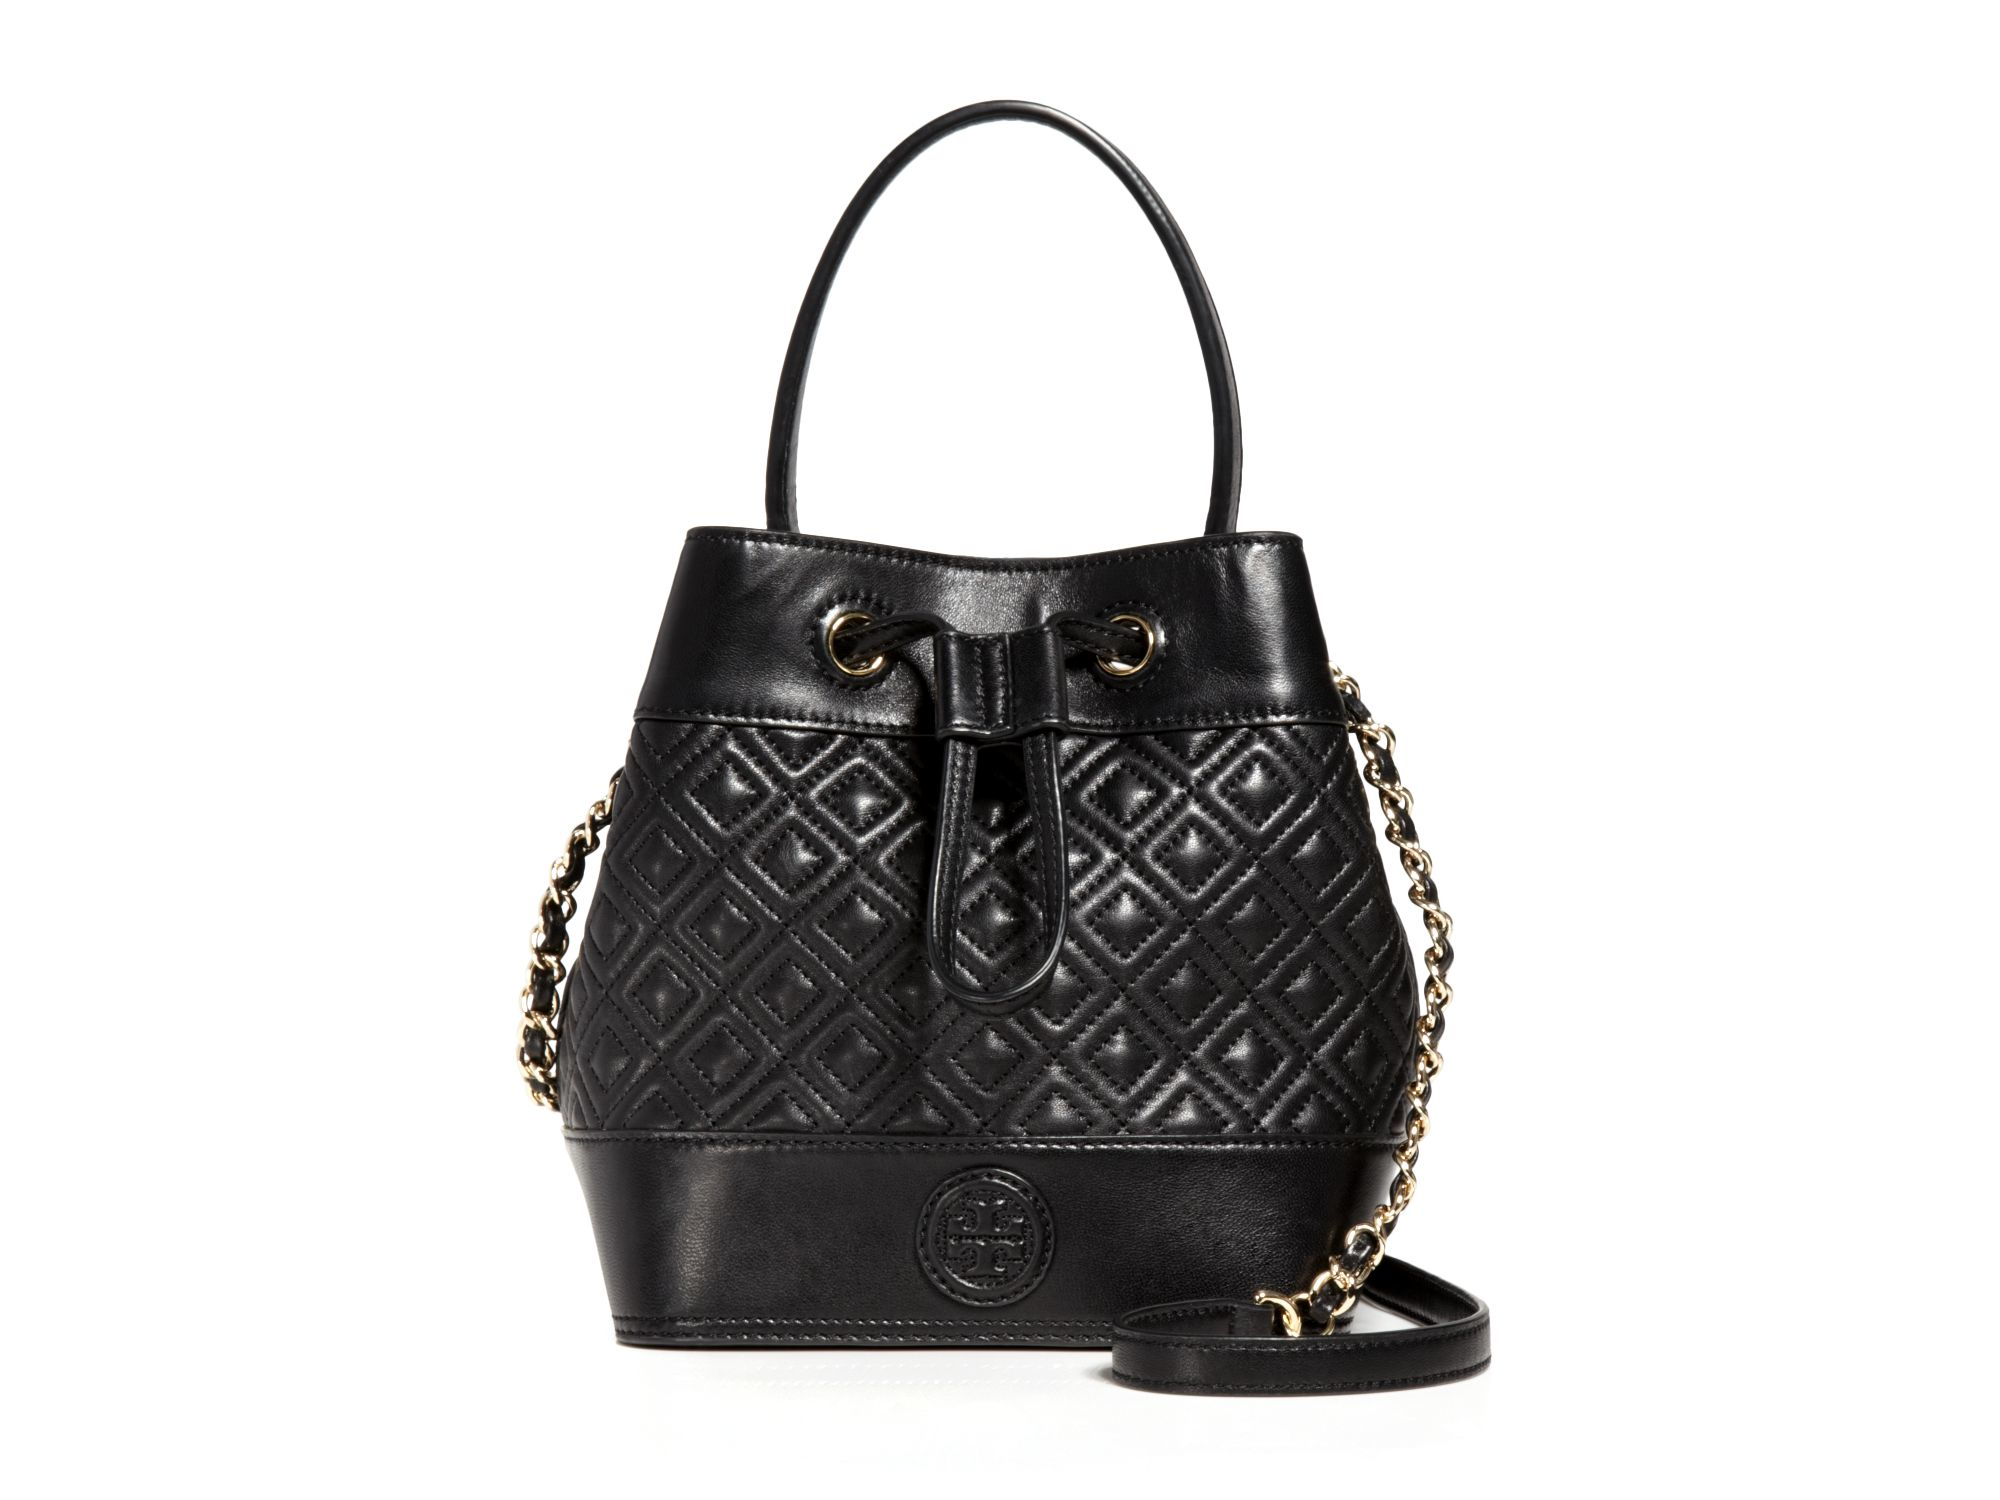 Lyst - Tory Burch Shoulder Bag - Marion Quilted Mini Bucket in Black